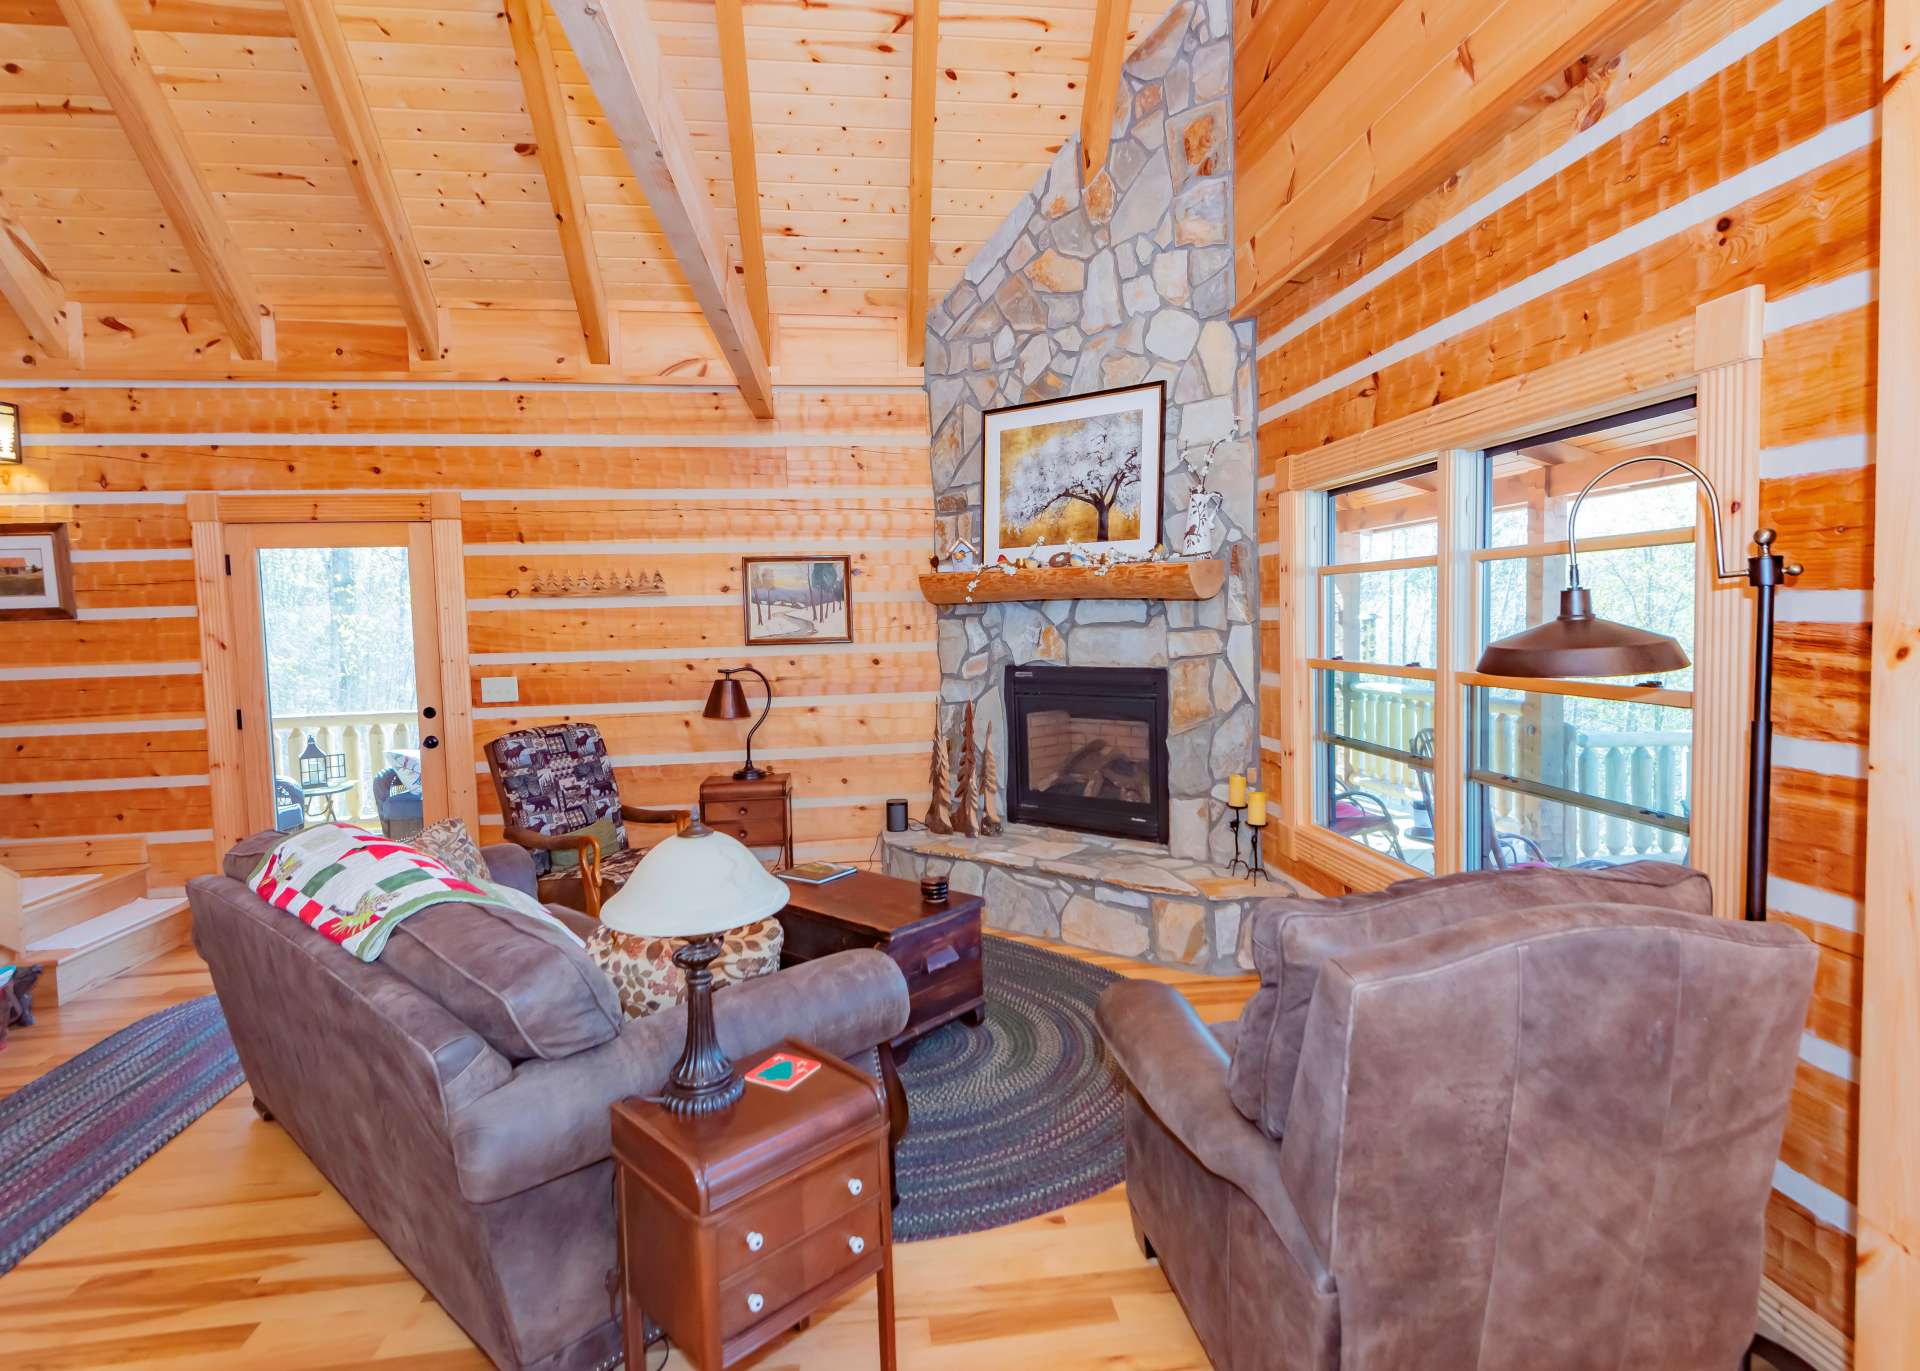 A stone fireplace with gas logs adds to the log cabin experience and adds warmth and ambiance on chilly winter evenings in the North Carolina Mountains.